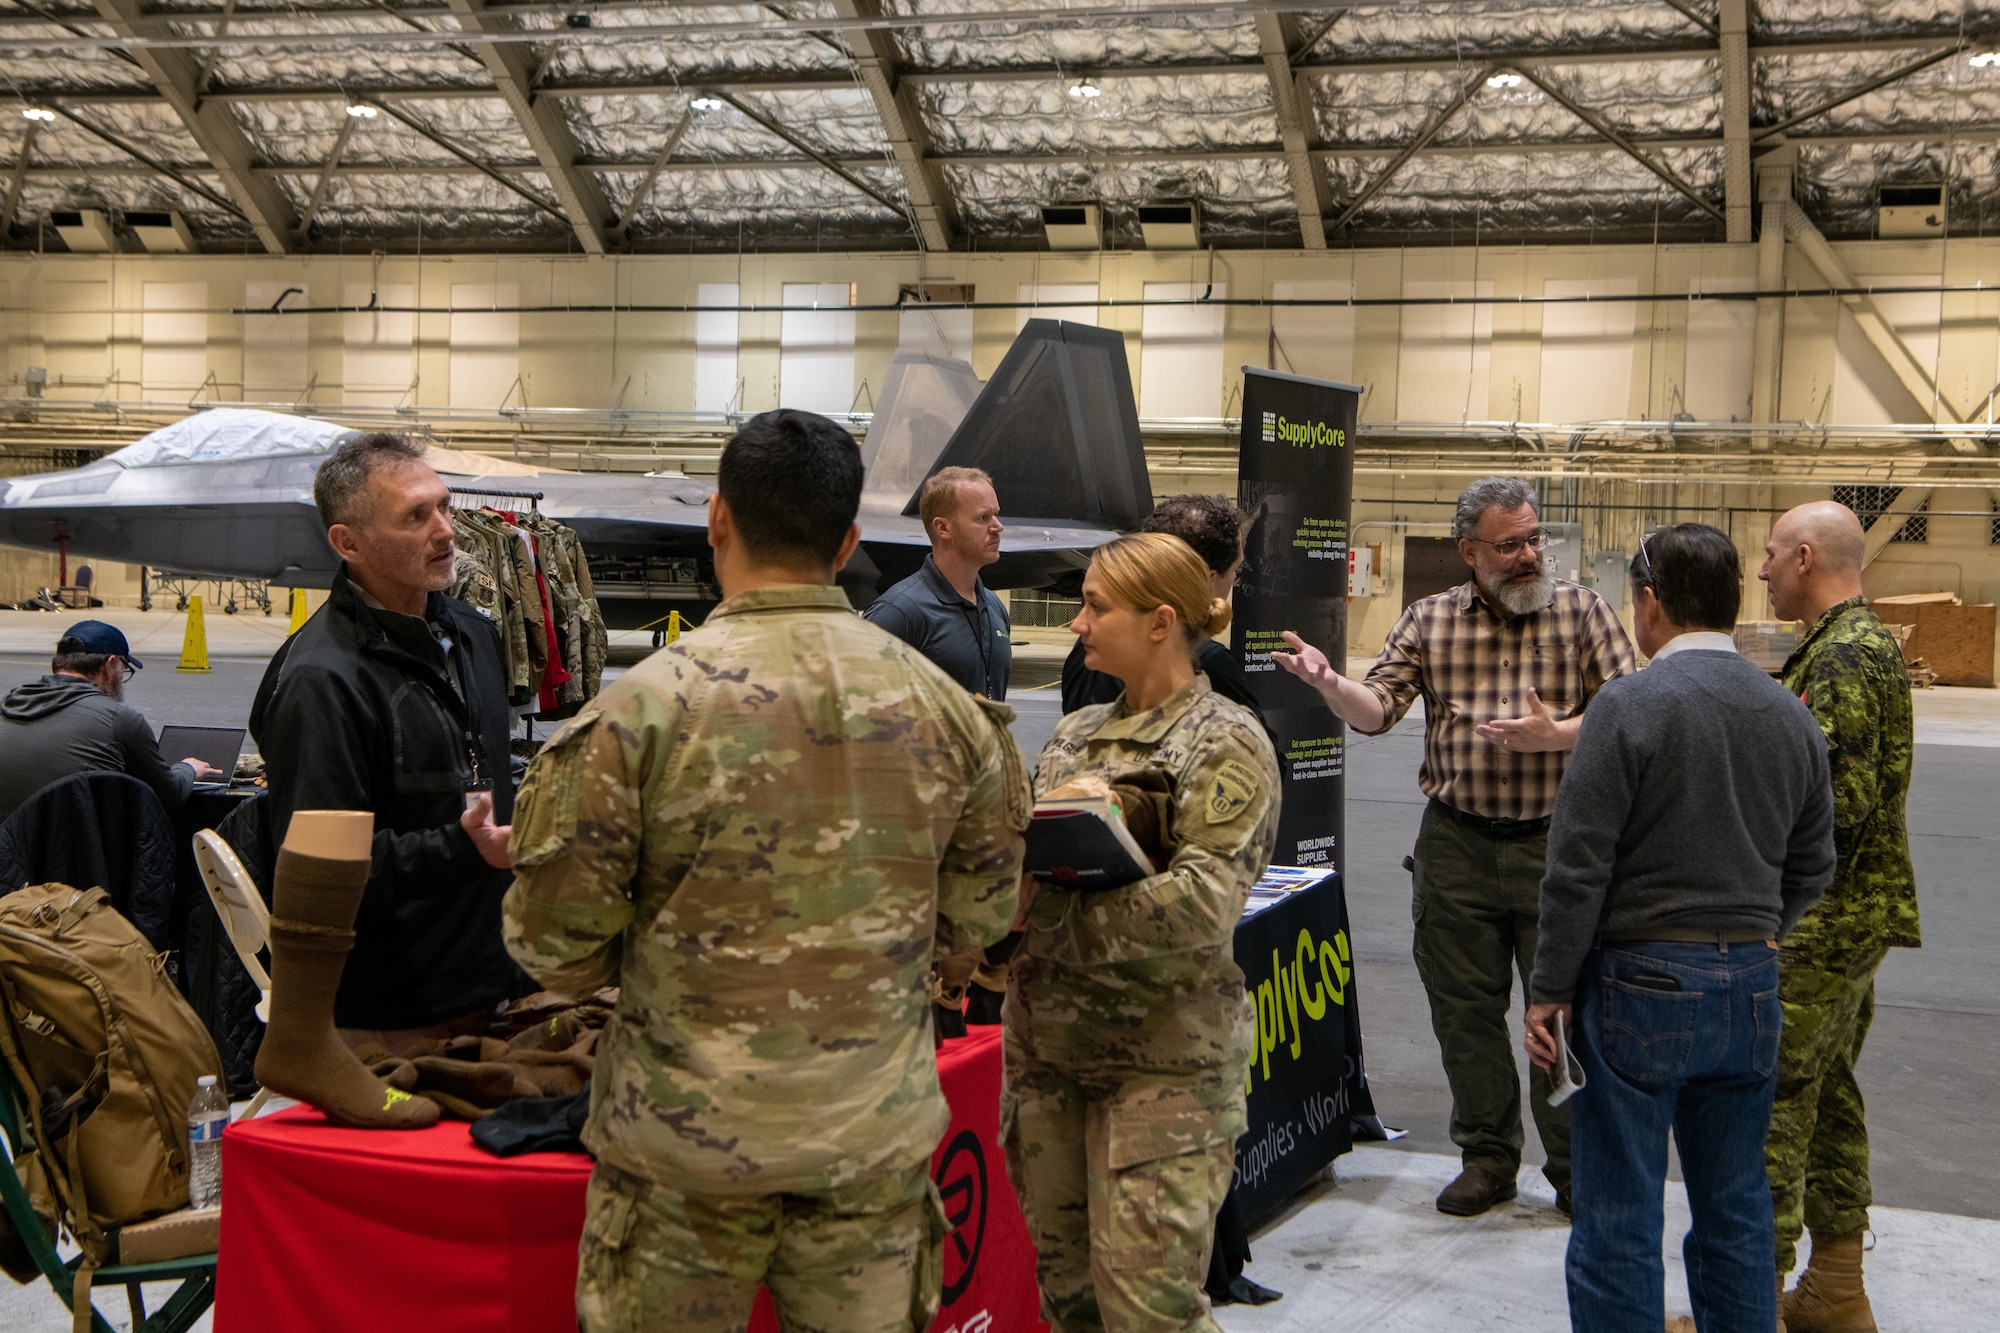 A photo of service members interacting with vendors at a technology expo